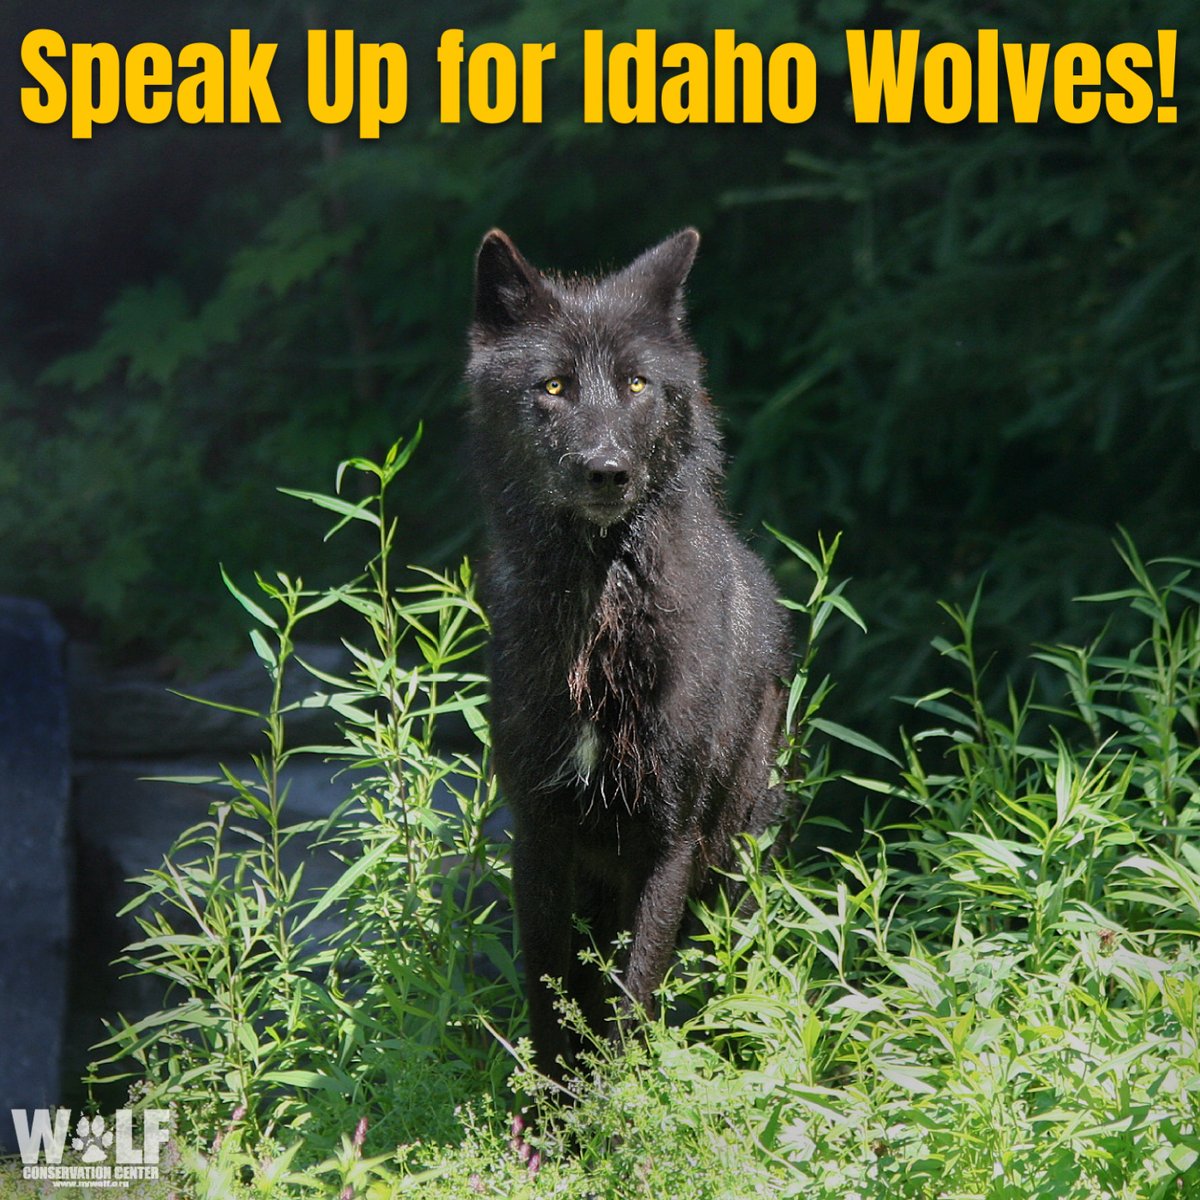 Idaho just approved its plan to kill 62% of its wolves via trophy hunts + incentivizing trapping with bounties.
@USFWS acknowledged the dire situation in Idaho and, in 2021, initiated a 12-month review, yet no action has been taken.
We won't stand idle → bit.ly/3nSSfRz